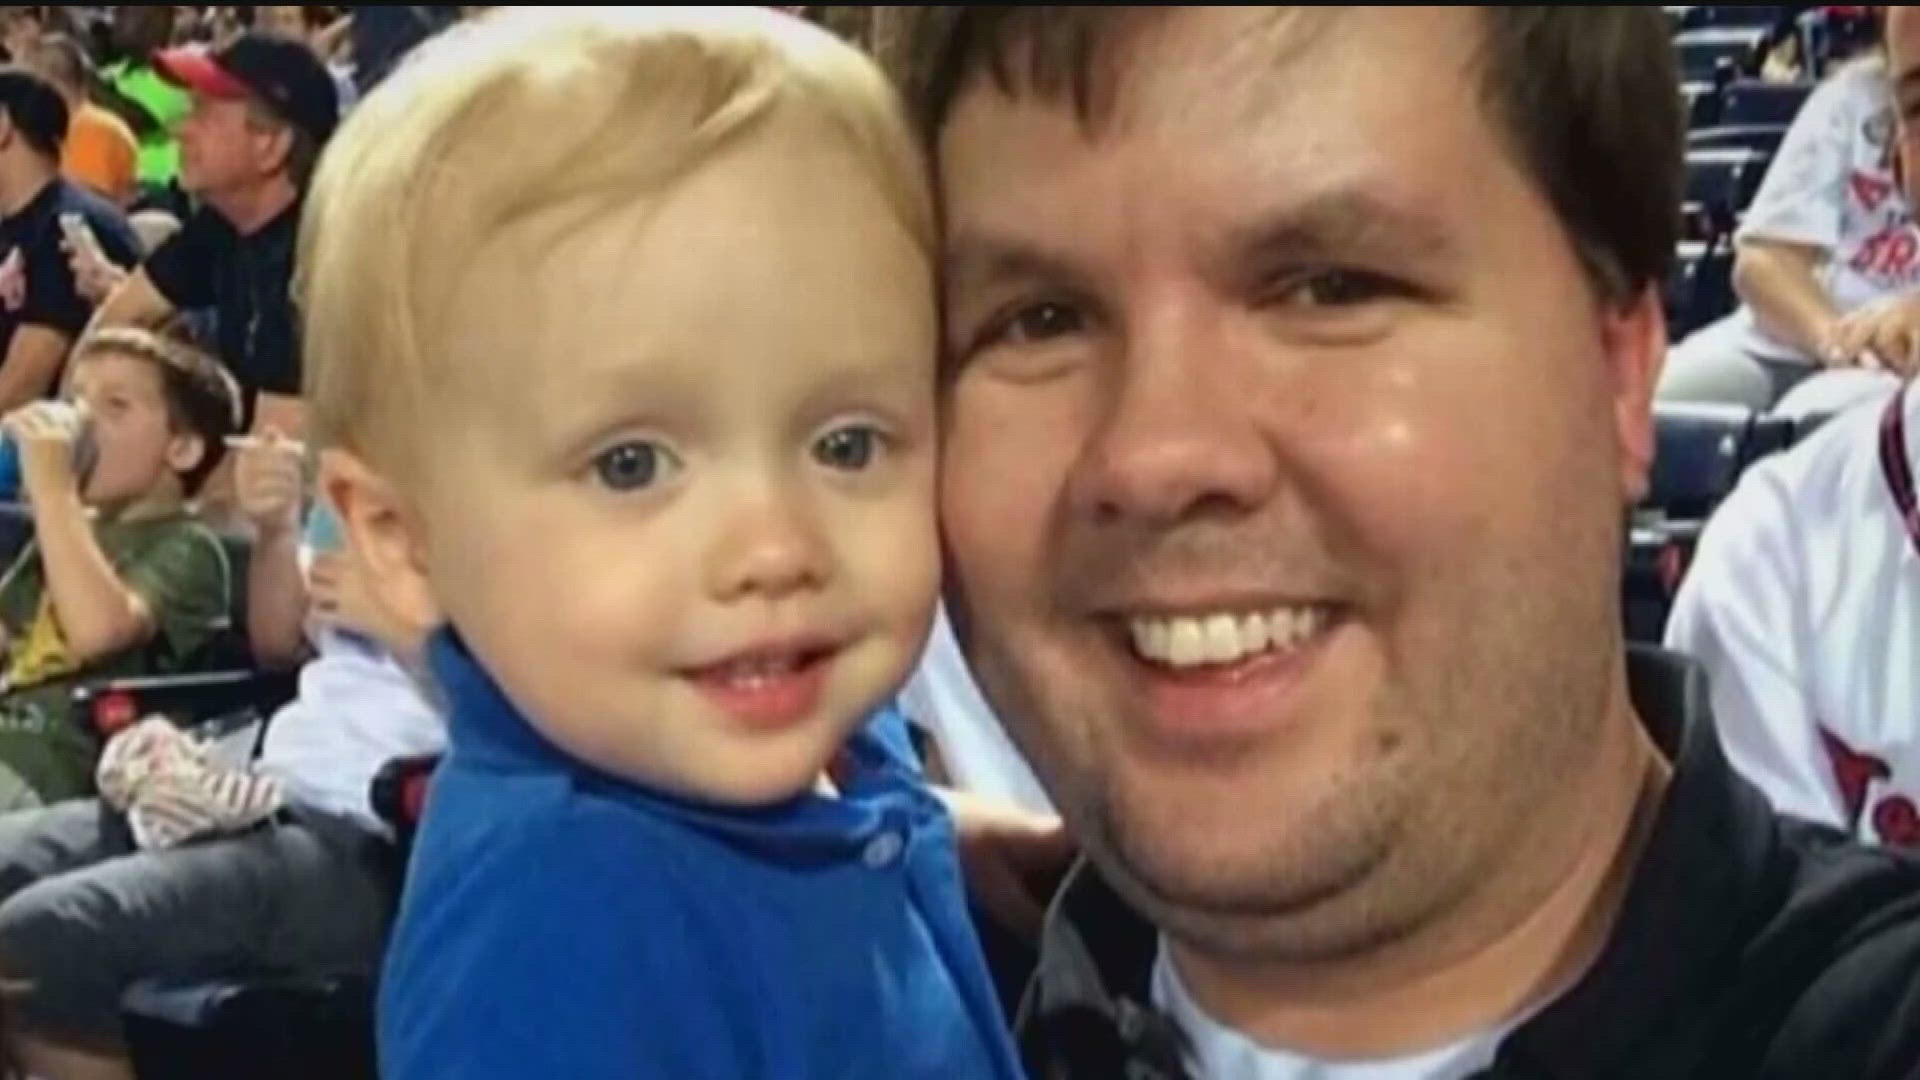 Ross Harris' conviction for the 2014 death of his son was overturned in 2022. Almost exactly 10 years since Cooper's death, Harris is walking free.